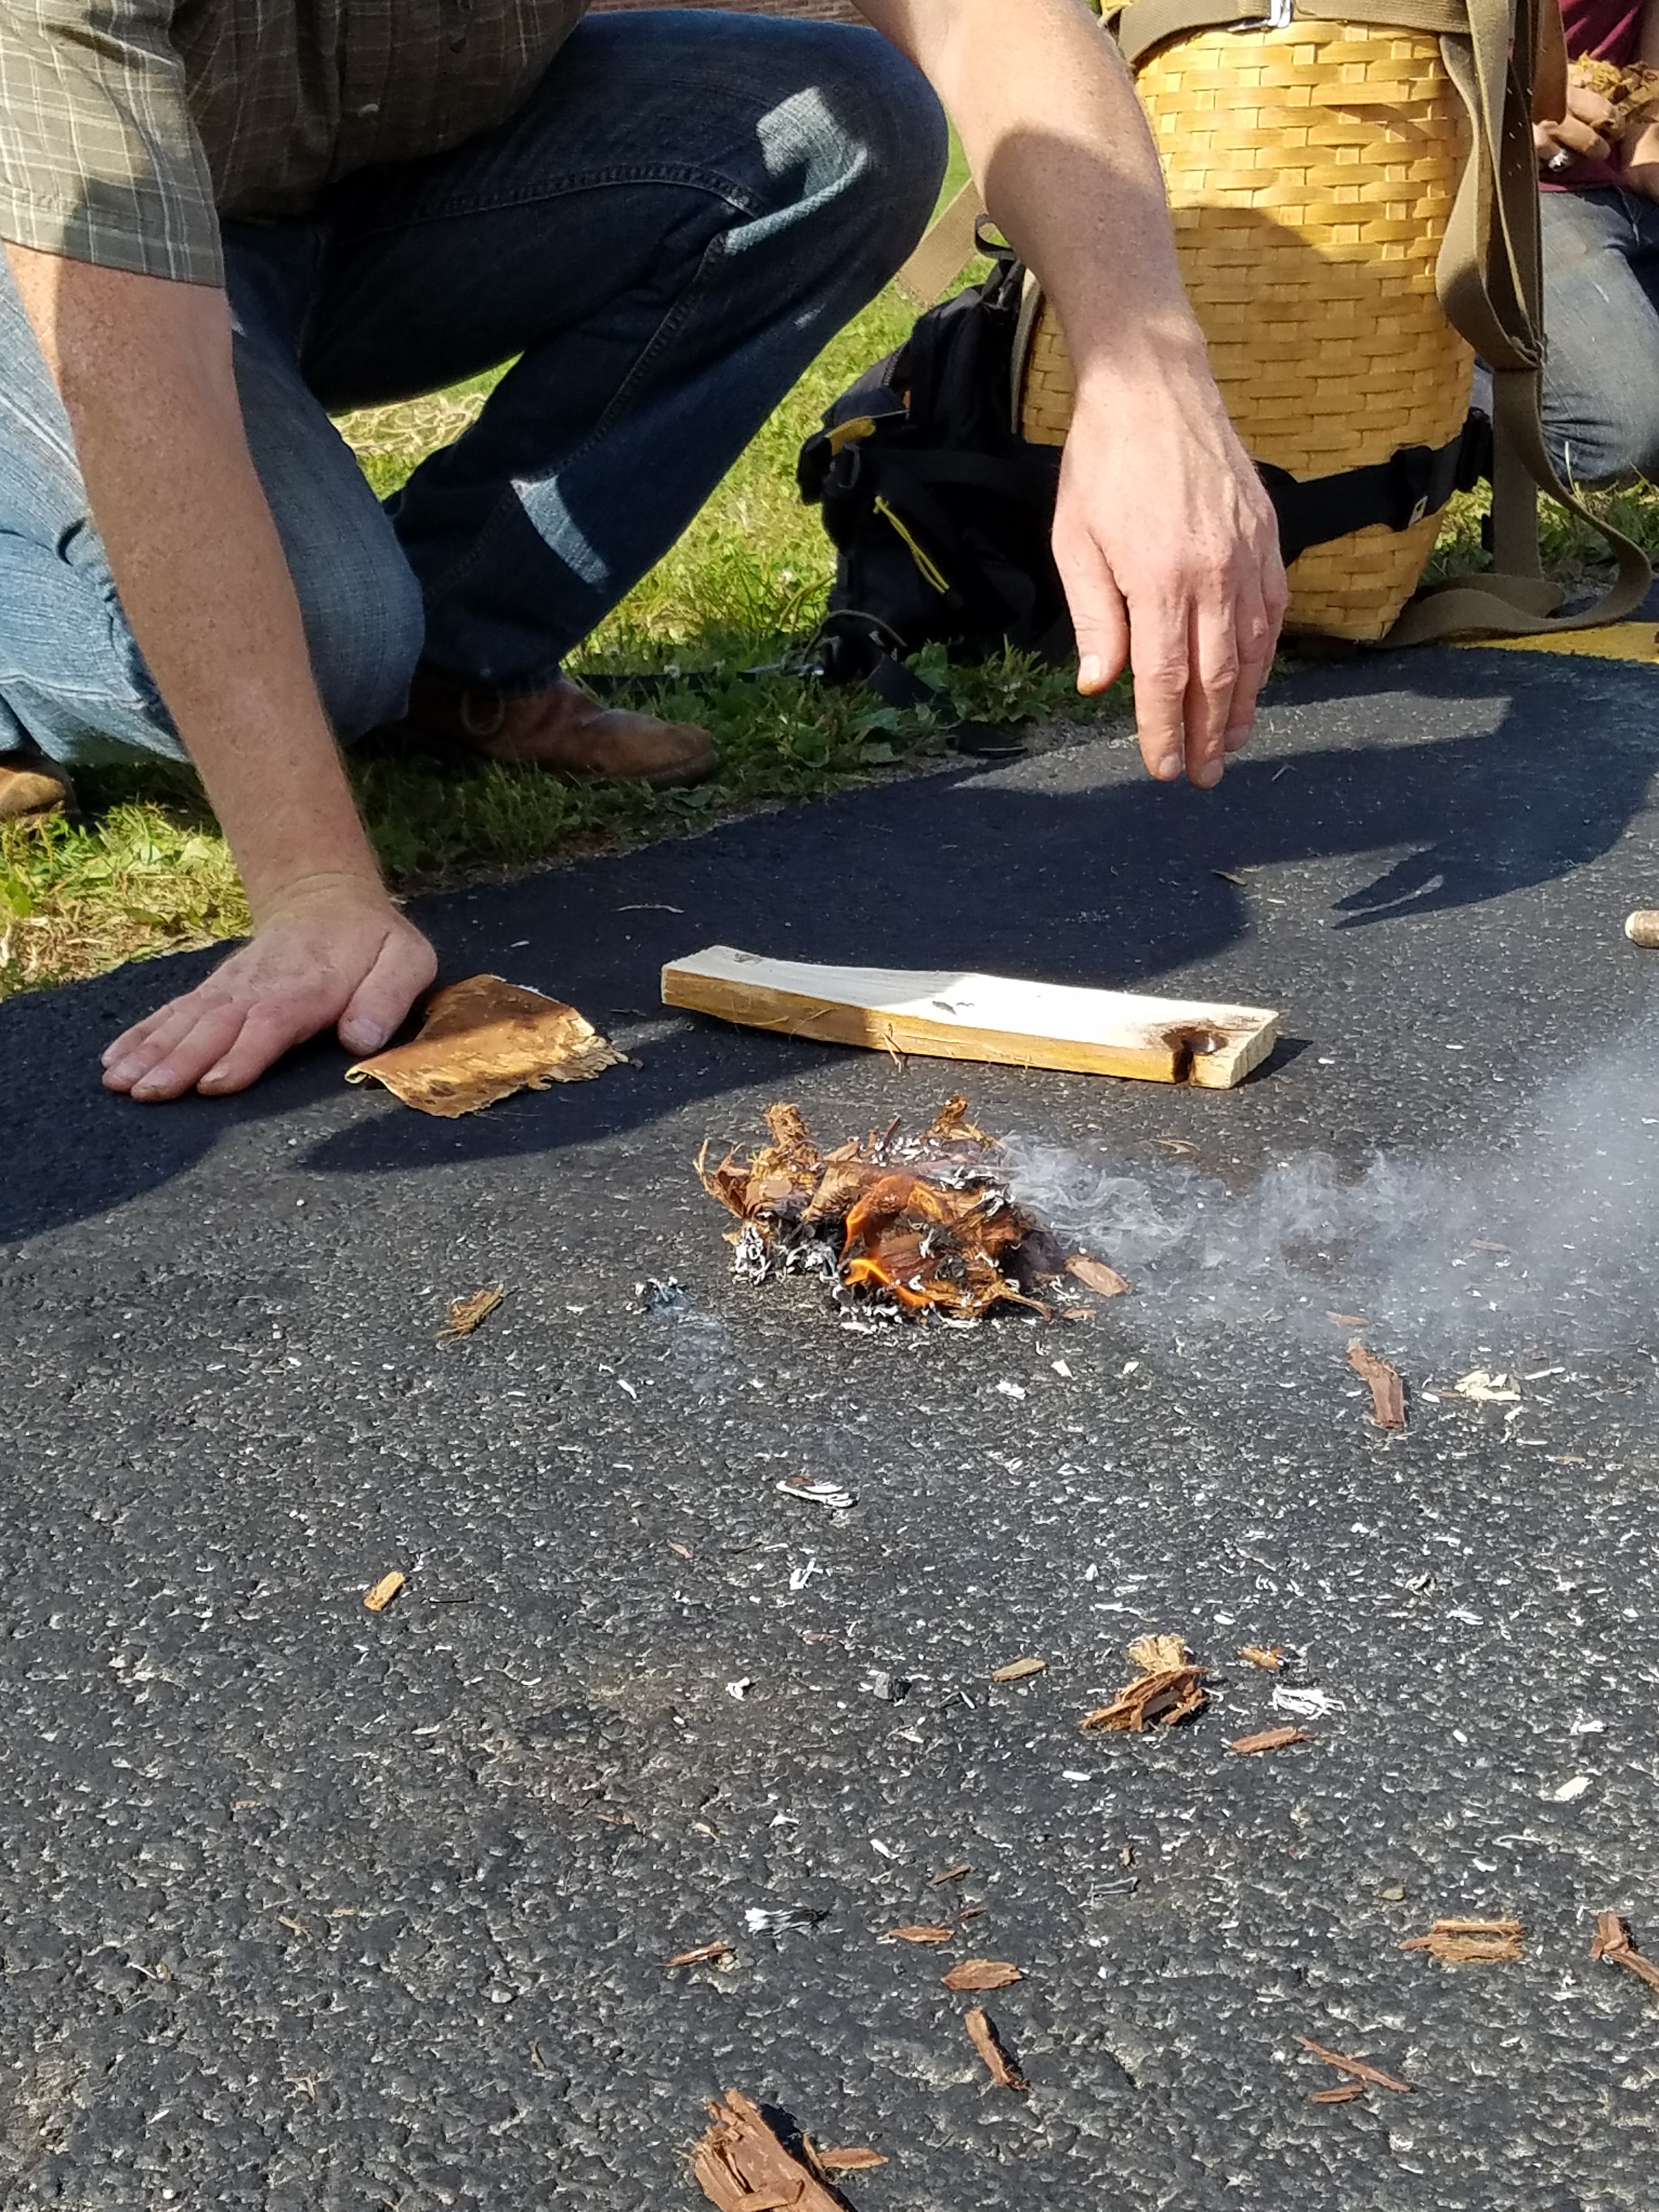 A hard earned ember, and a fun lesson to share with friends and family.